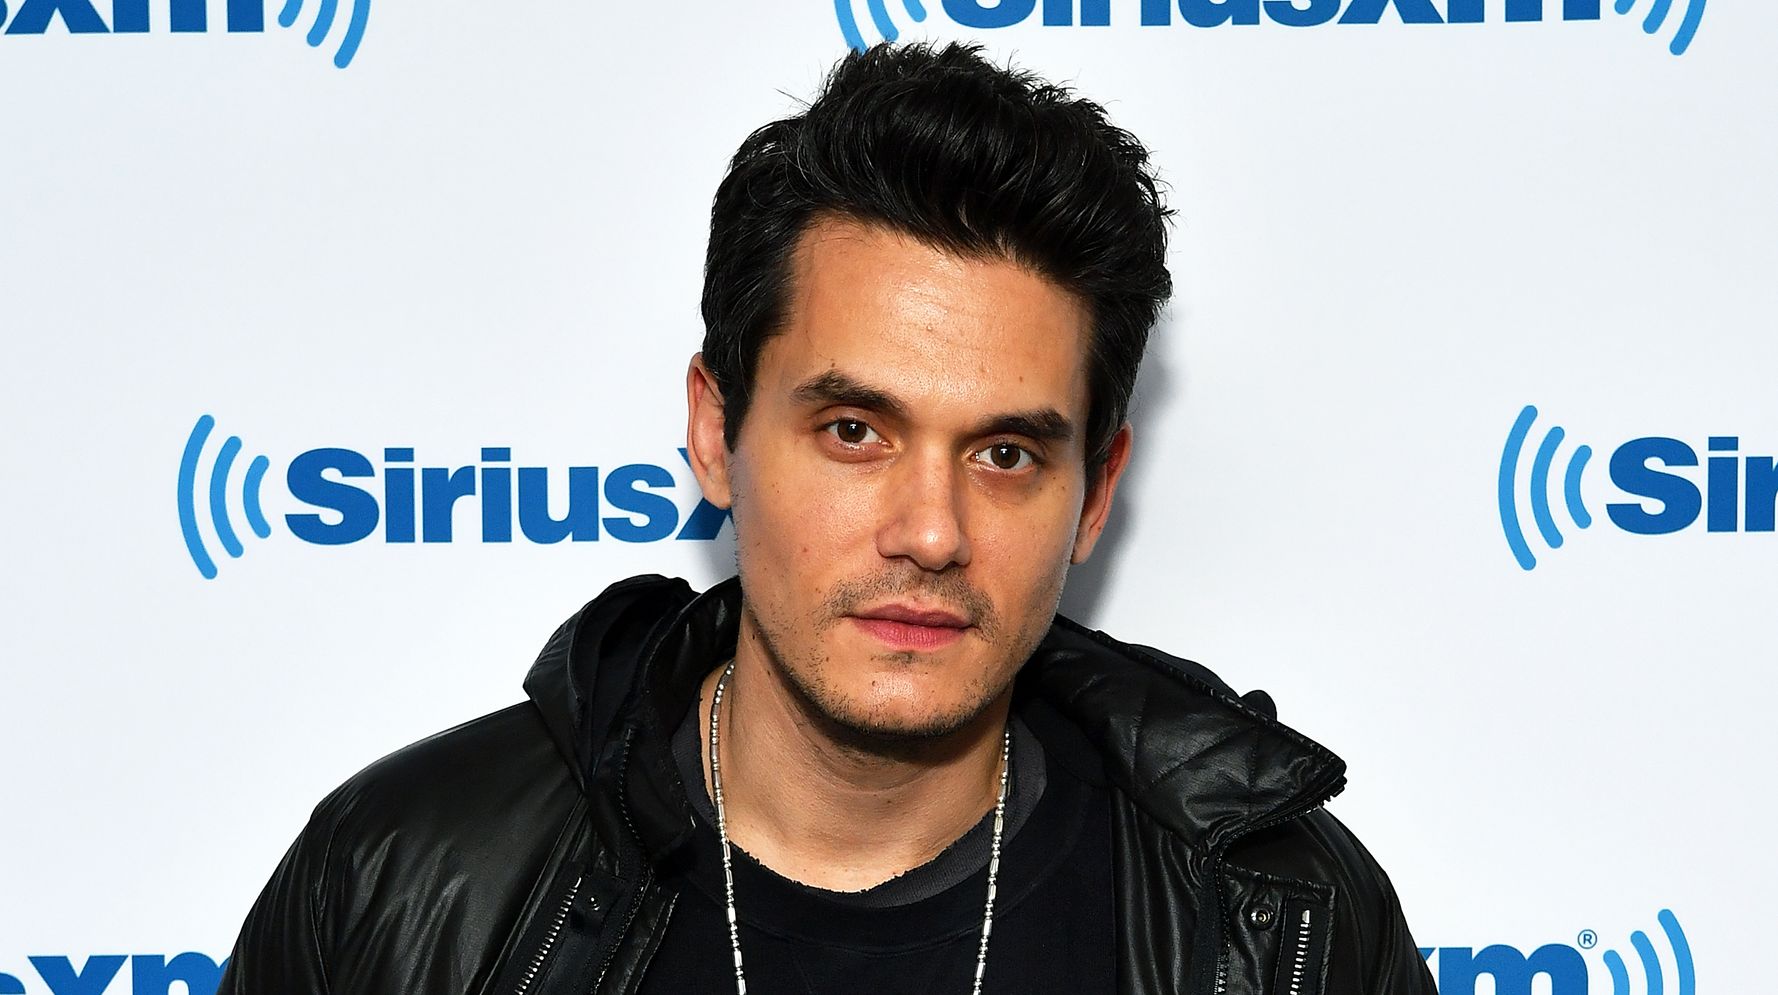 John Mayer: ‘Framing Britney Spears’ made me realize my male privilege